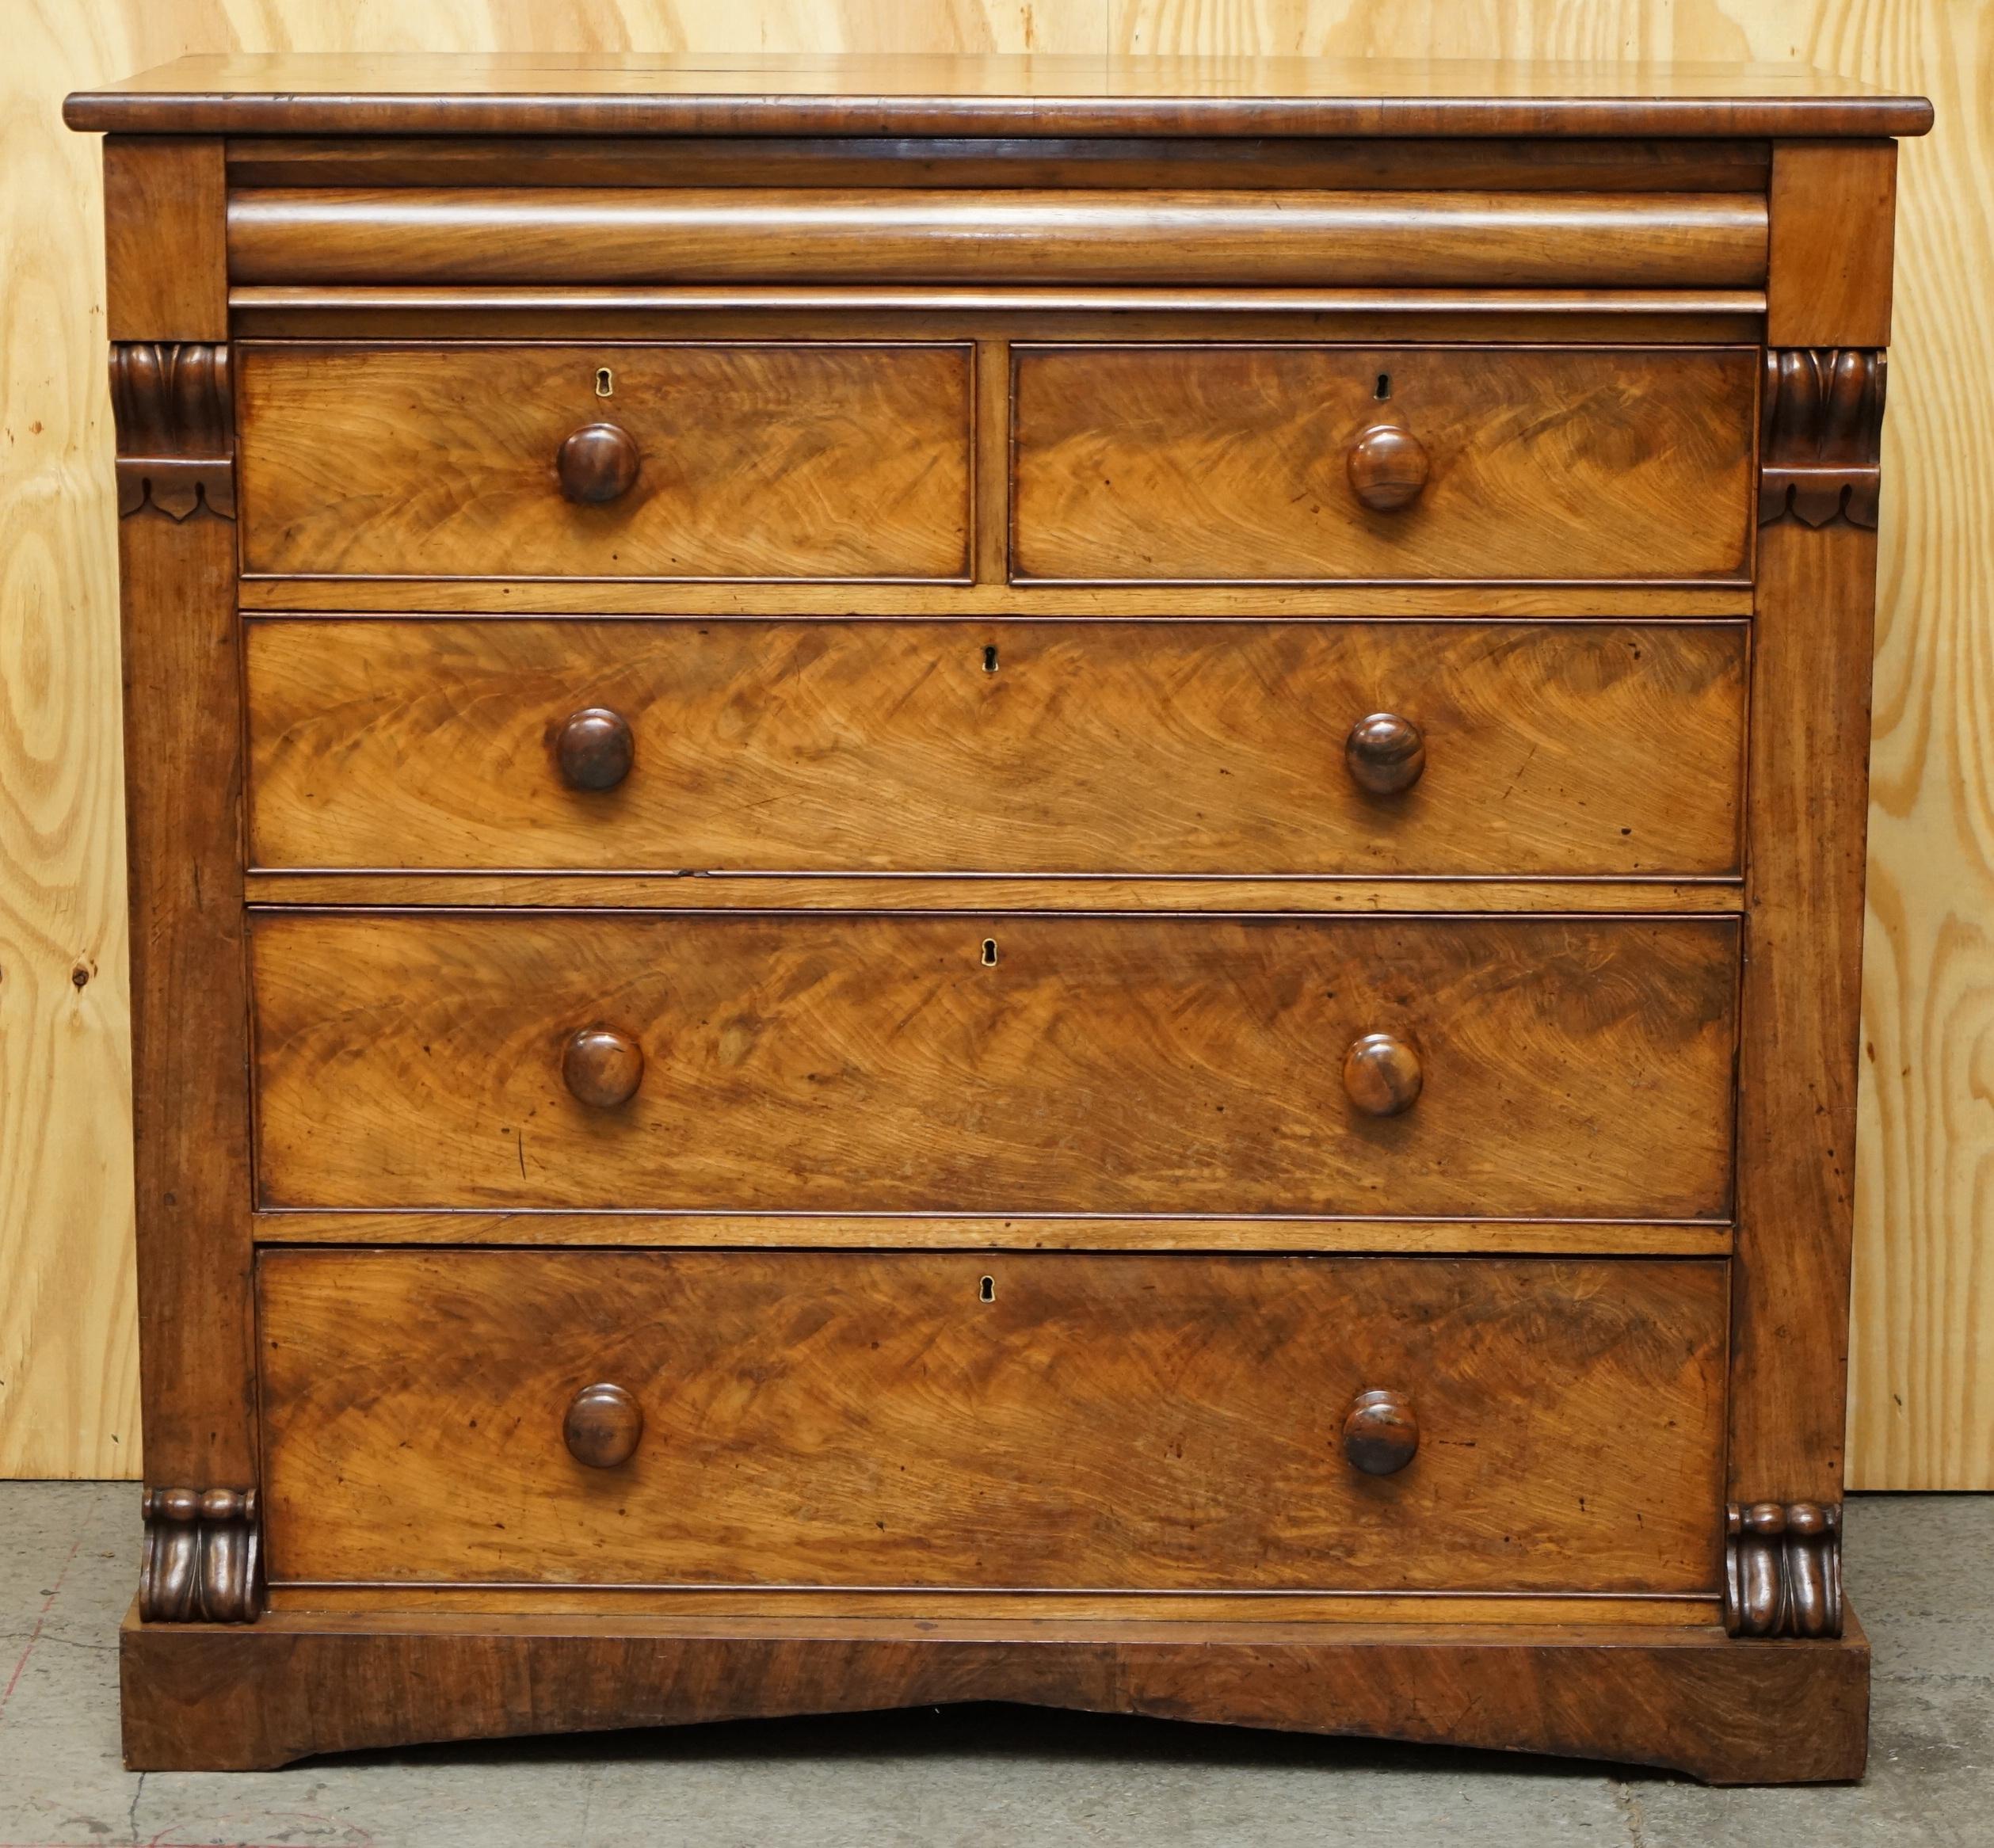 We are delighted to this stunning large 19th century light flamed mahogany chest of drawers with hidden top drawer

A very good looking and functional piece of collectable furniture. These drawers are around 40% larger than standard pieces, they